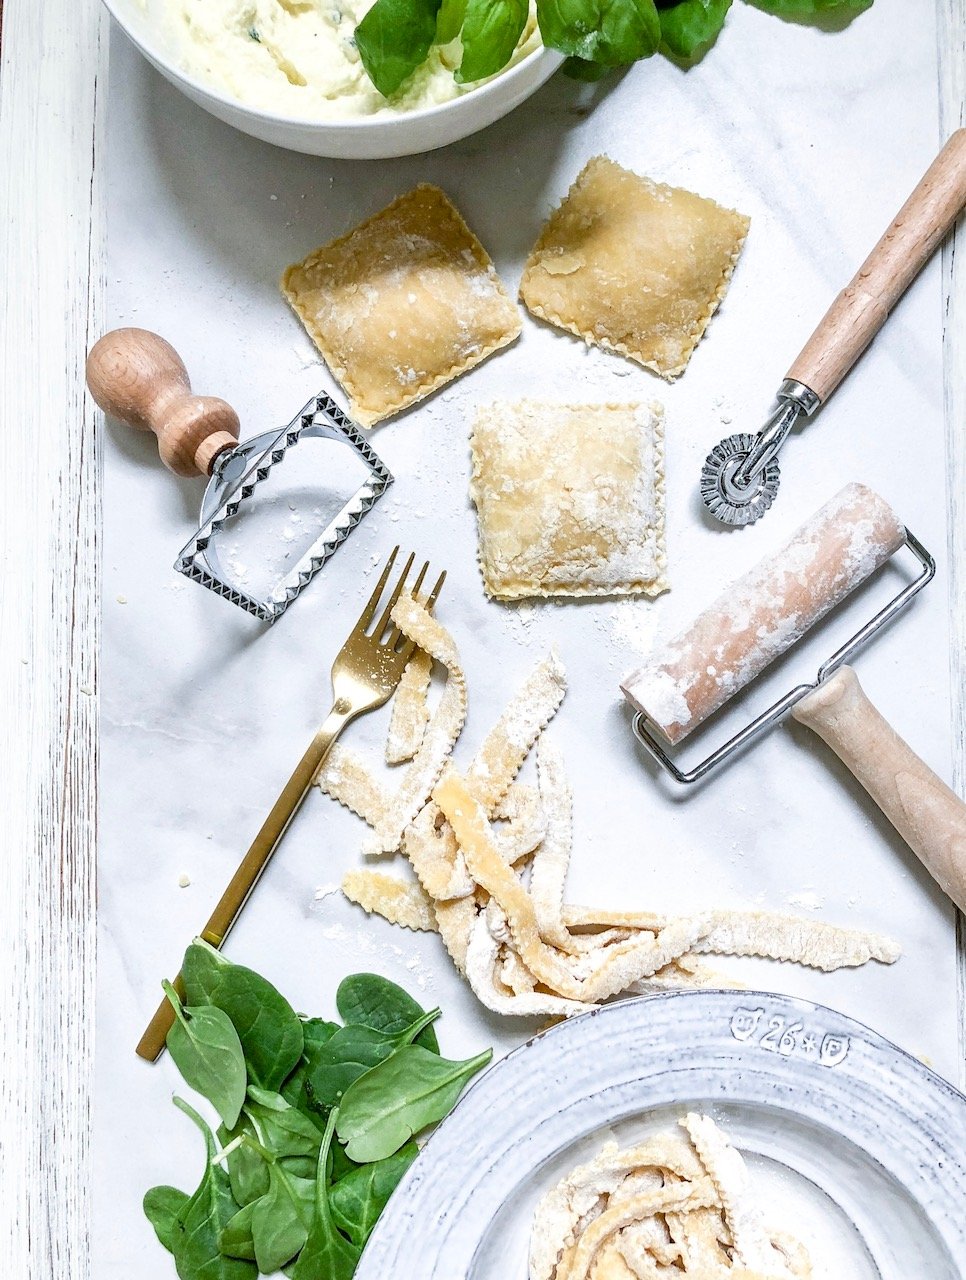 Lifestyle Blogger Chocolate & Lace shares her recipe for handmade Spinach + Ricotta Ravioli